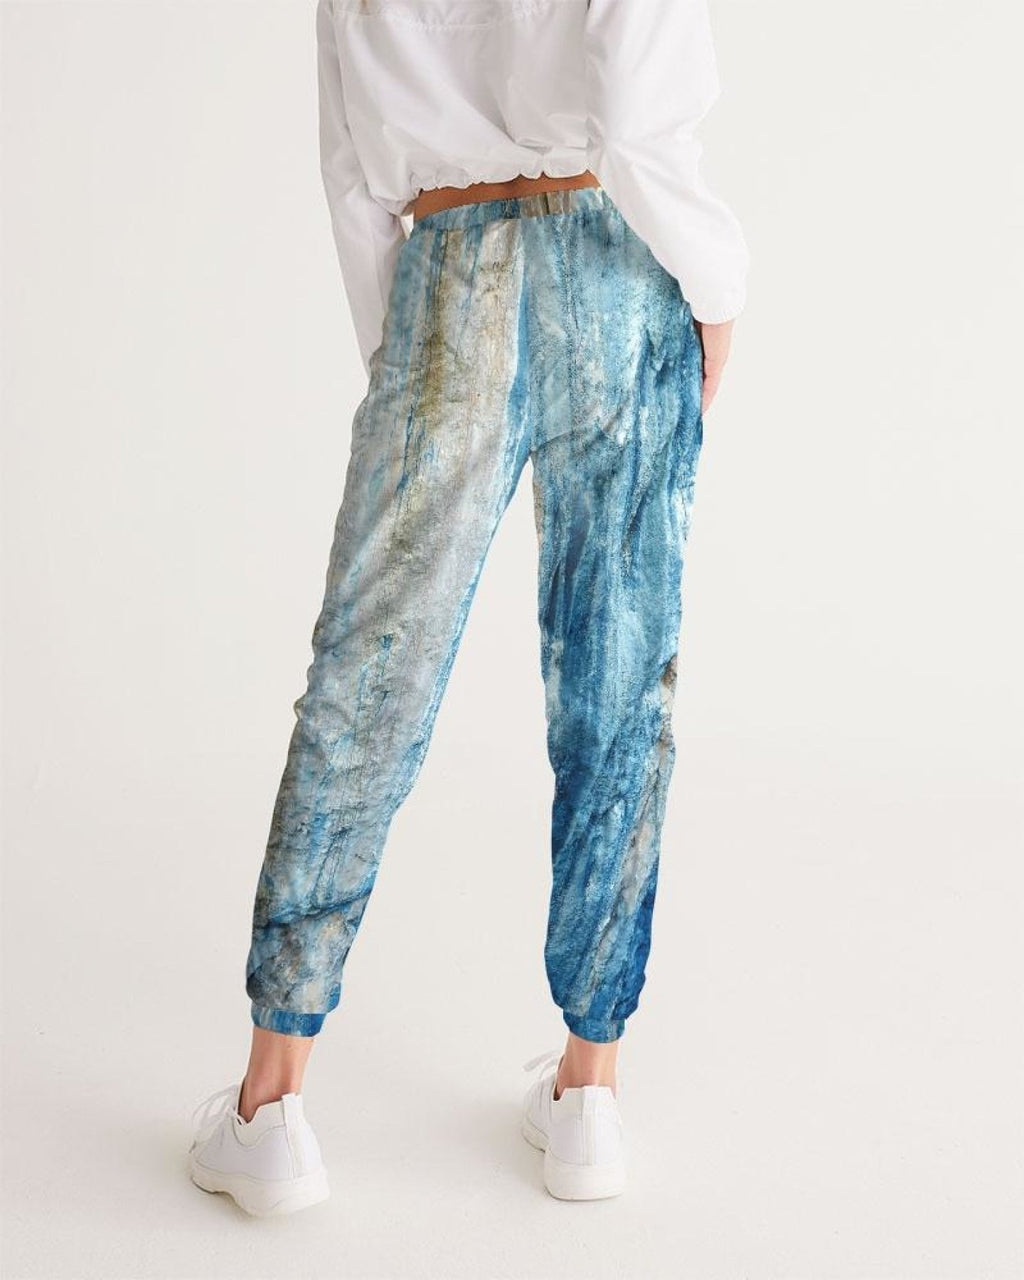 Girls Sportswear Gray Blue And White Abstract Style Track Pants